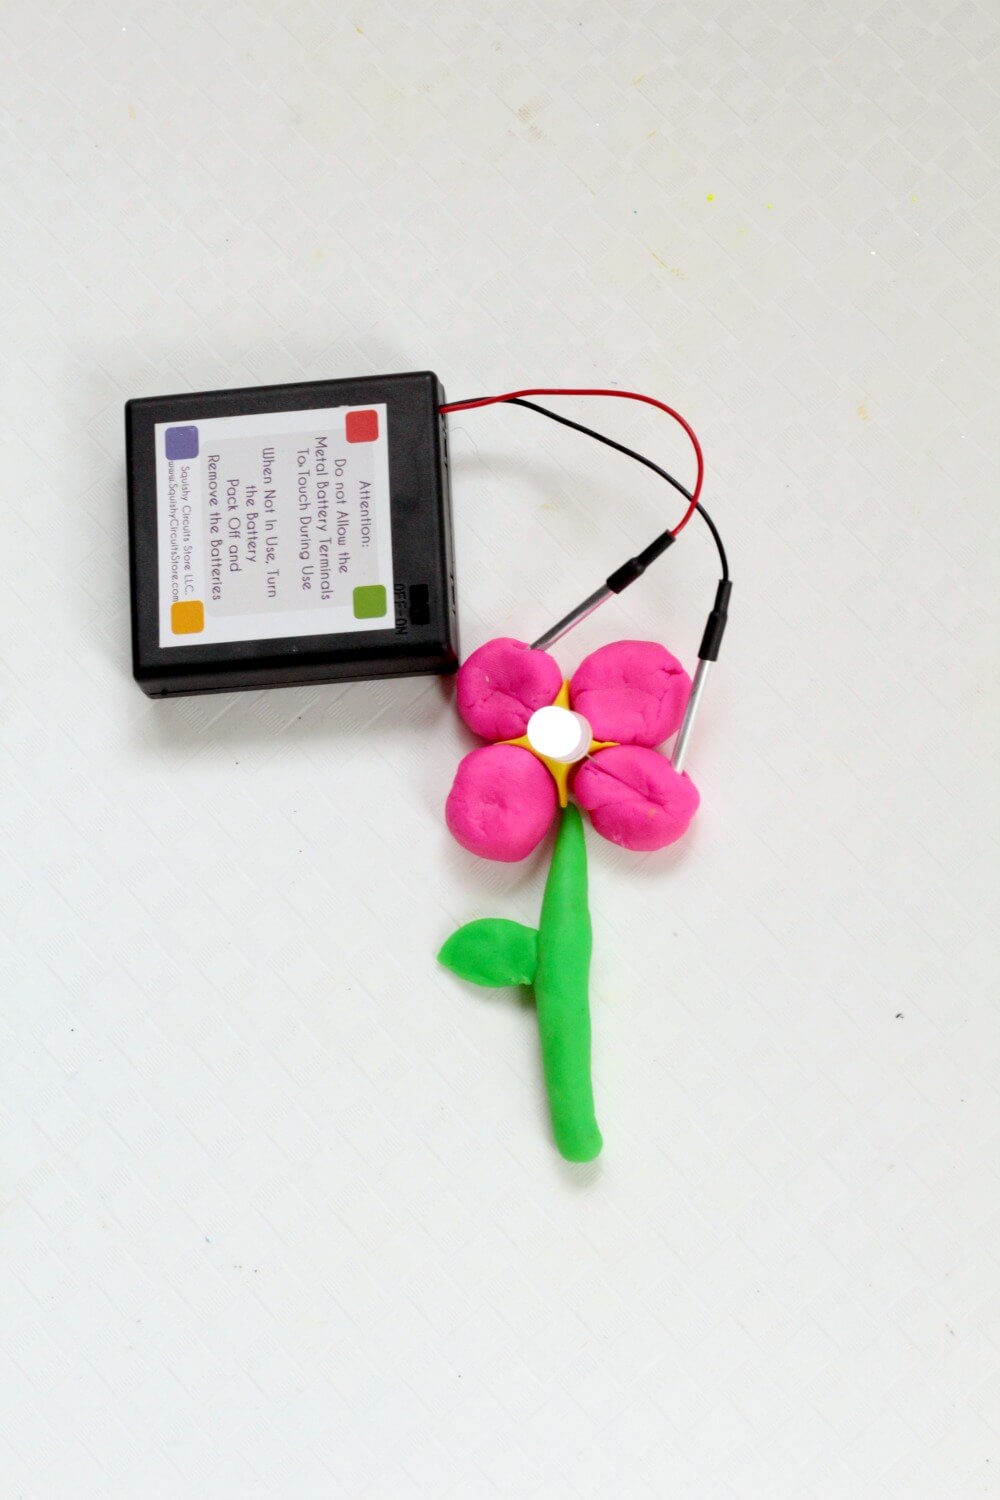 Make your very own light-up flower with a Squishy Circuits kit! Kids will love making a flower that really lights up in this STEM project!